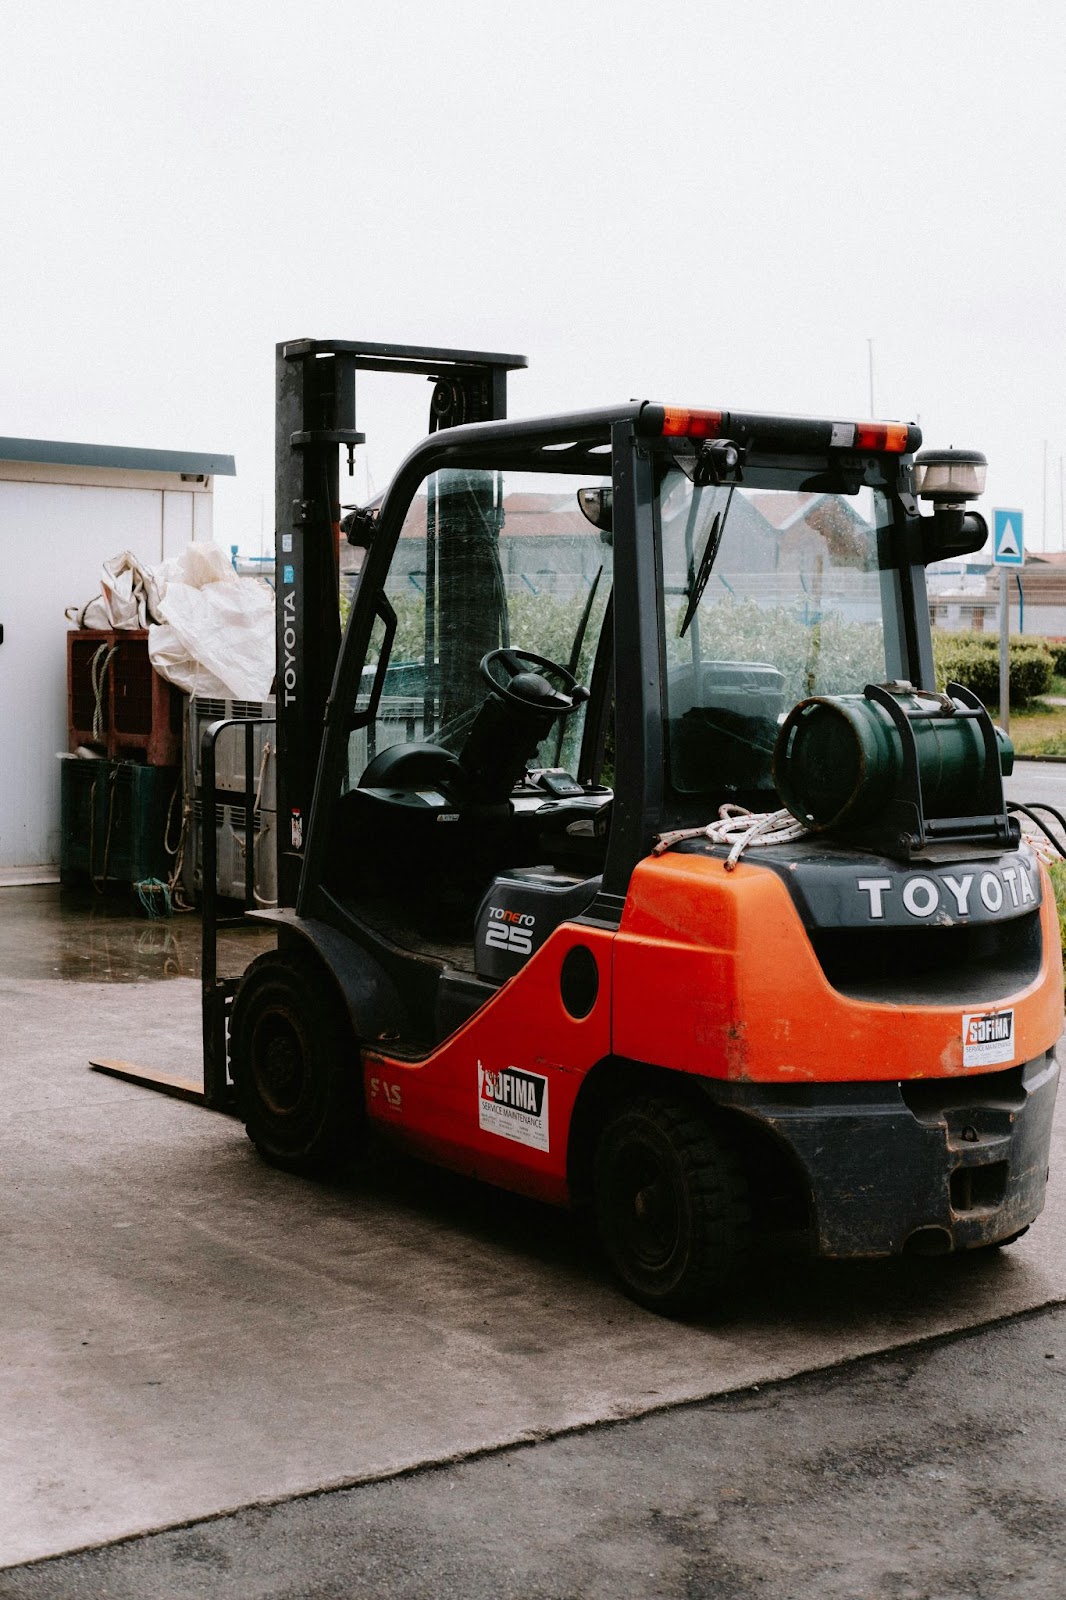 An orange Toyota forklift parked outdoors